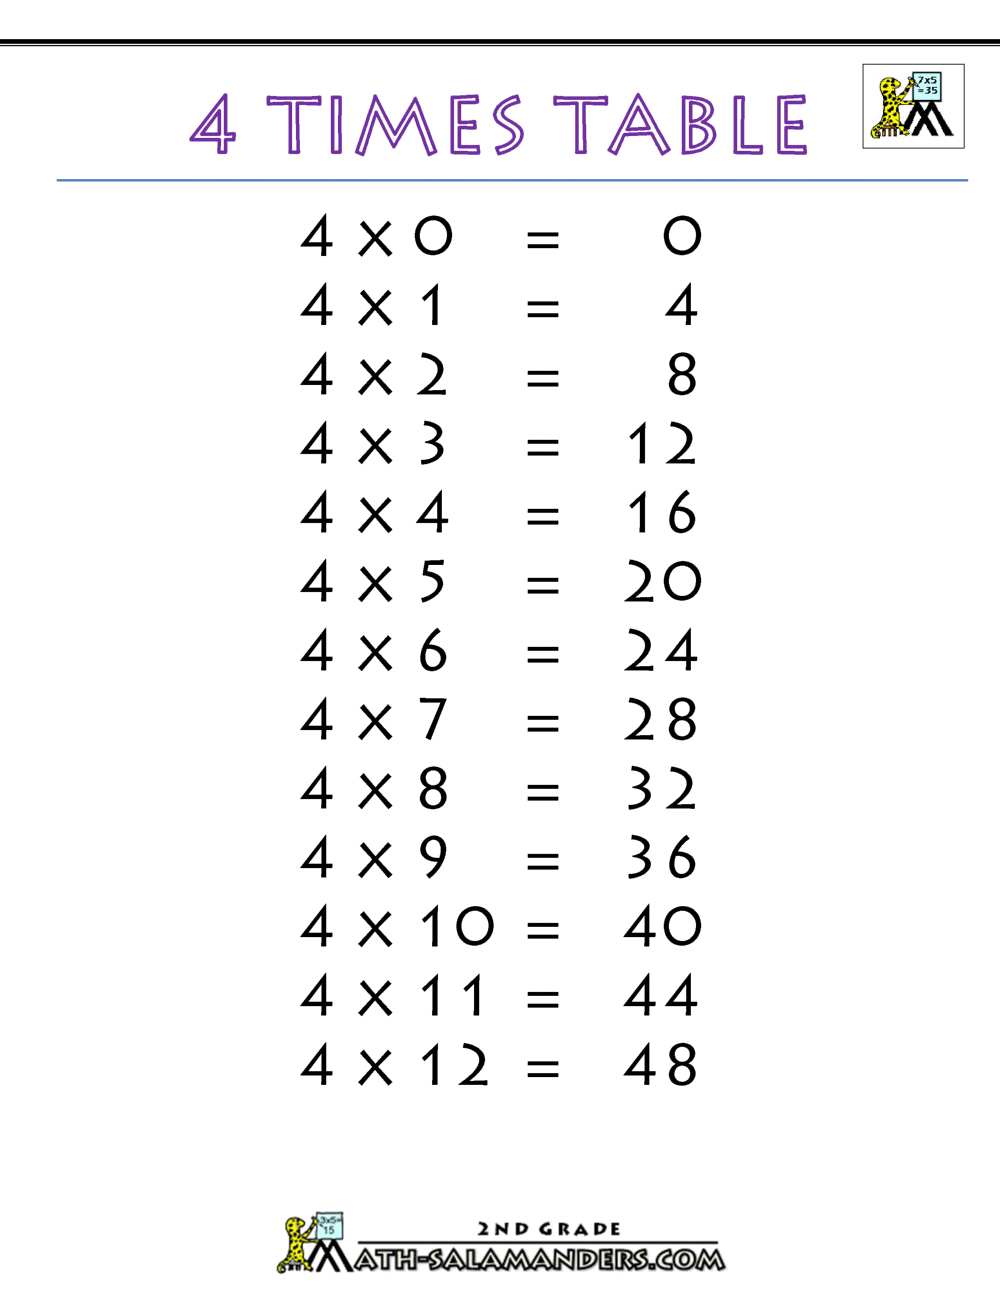 multiplication facts 4 times table